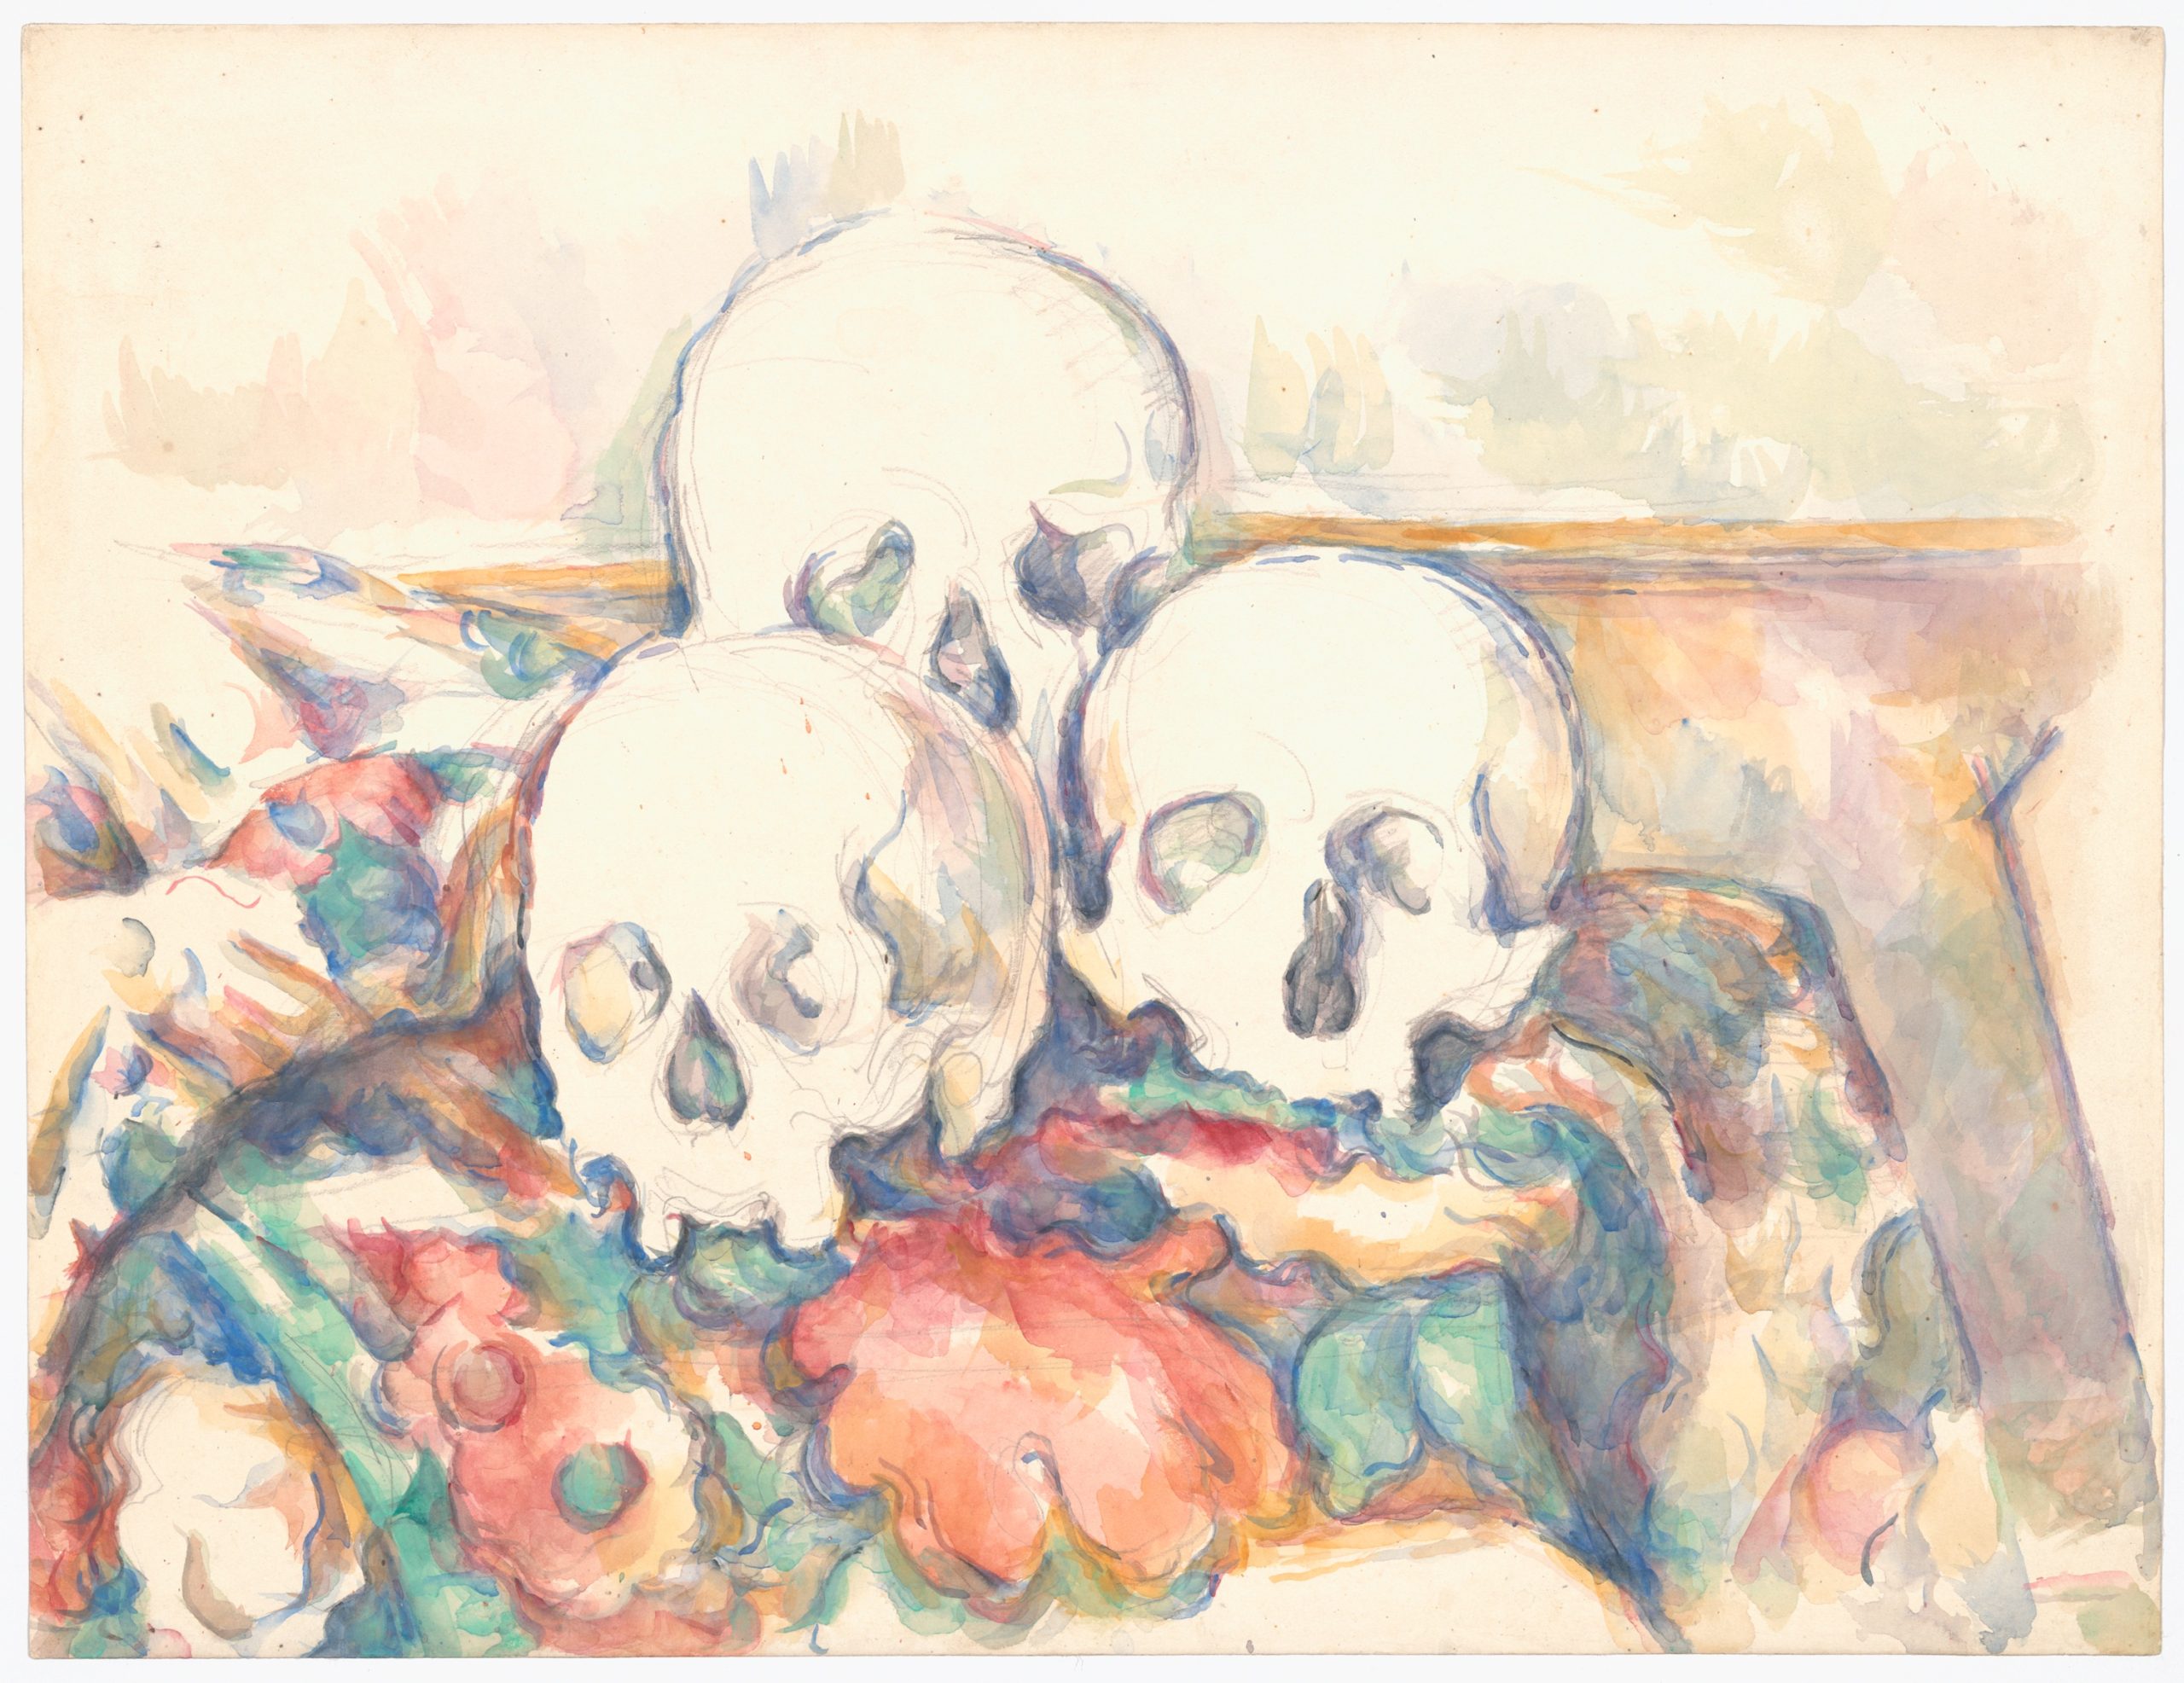 Paul Cezanne - The Three Skulls 1902-6. The Art Institute of Chicago. Olivia Shaler Swan Memorial Collection